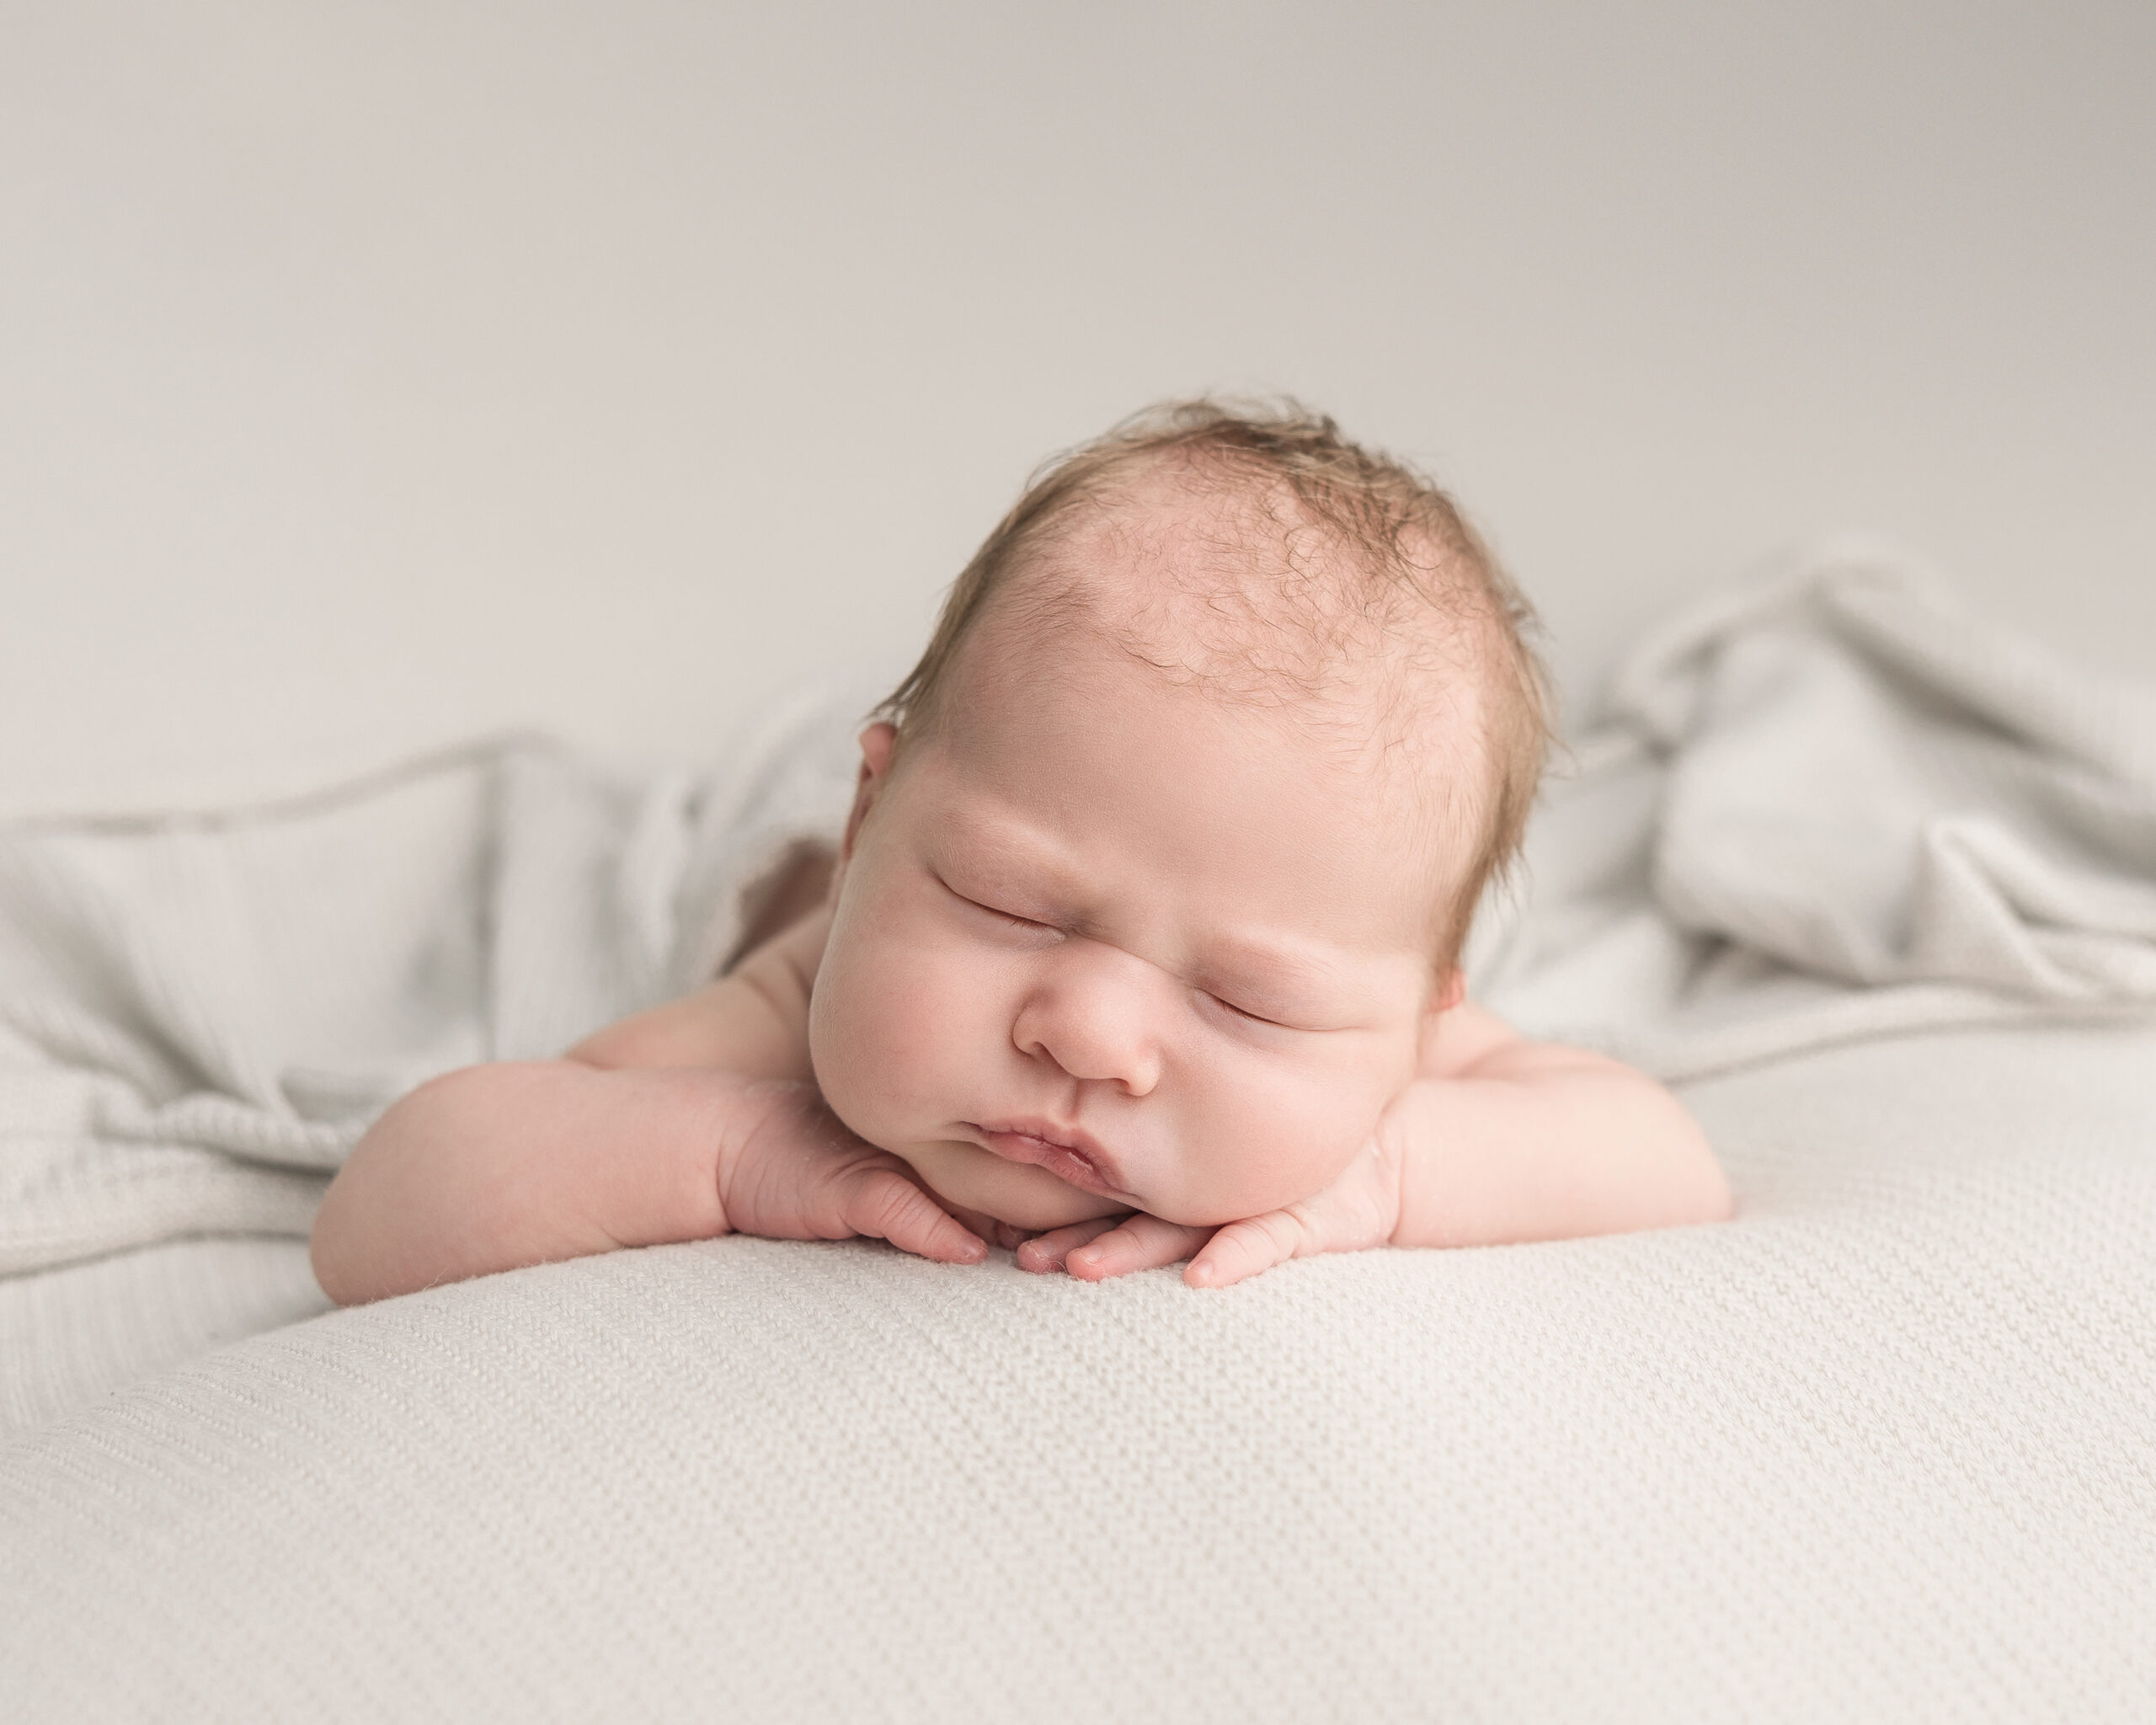 baby with head resting on hands lactation consultants portland